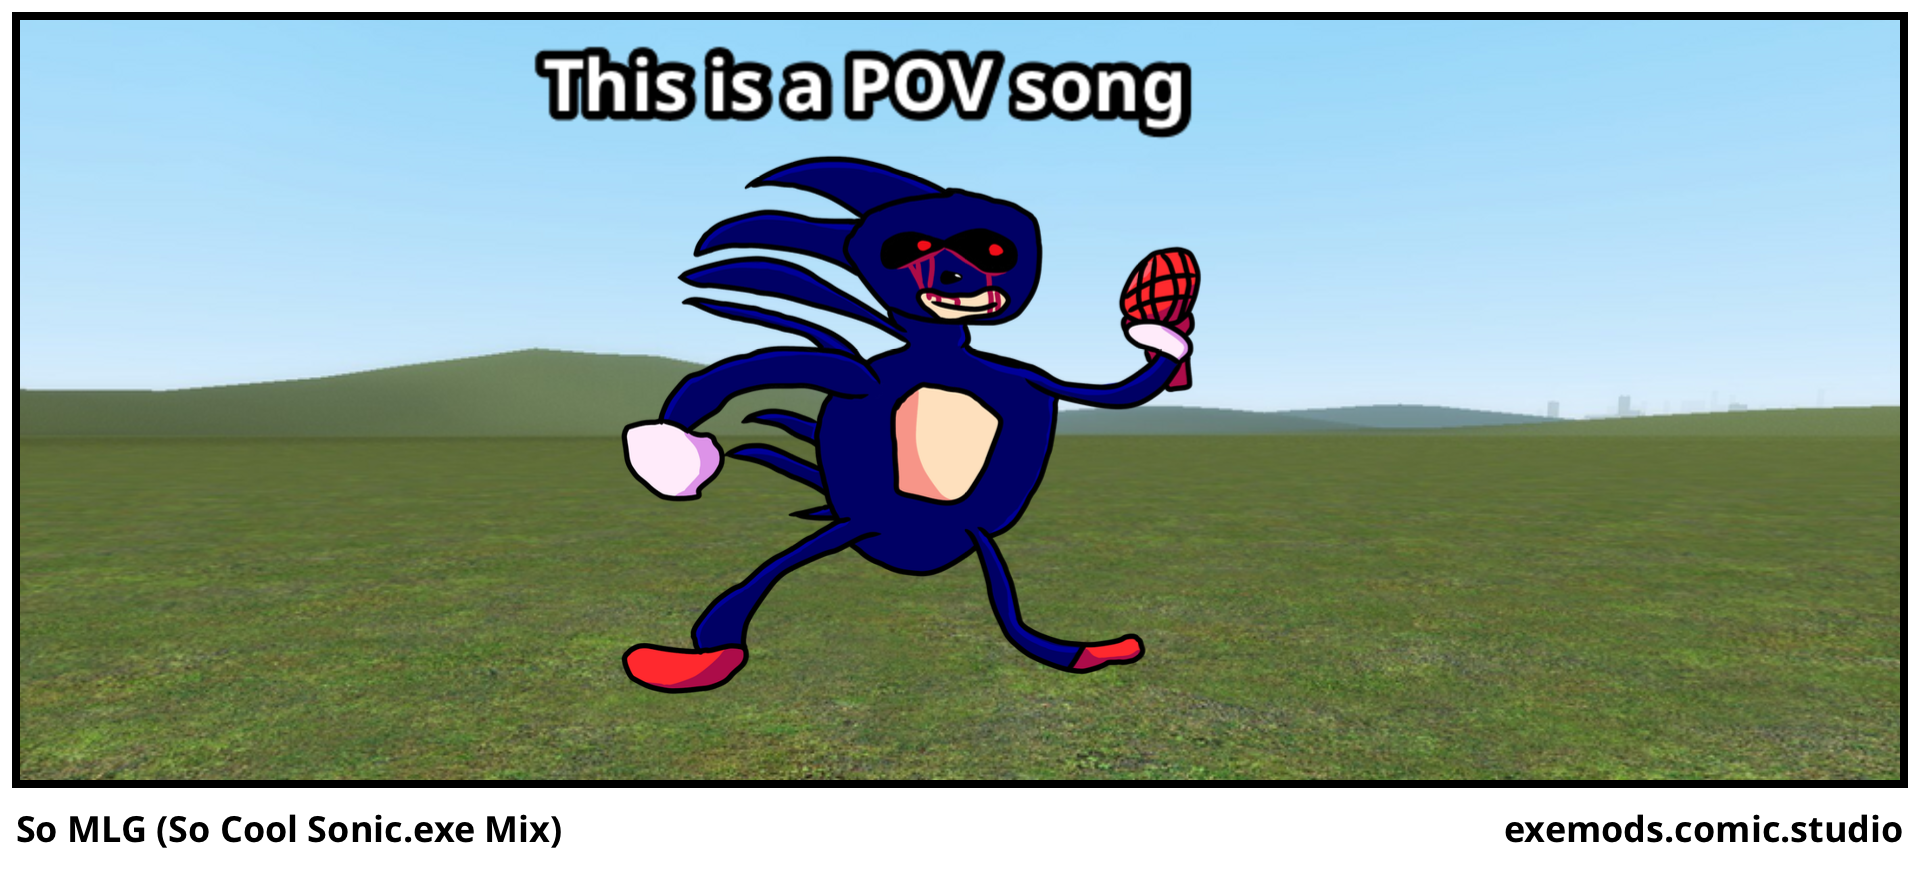 So MLG (So Cool Sonic.exe Mix) 